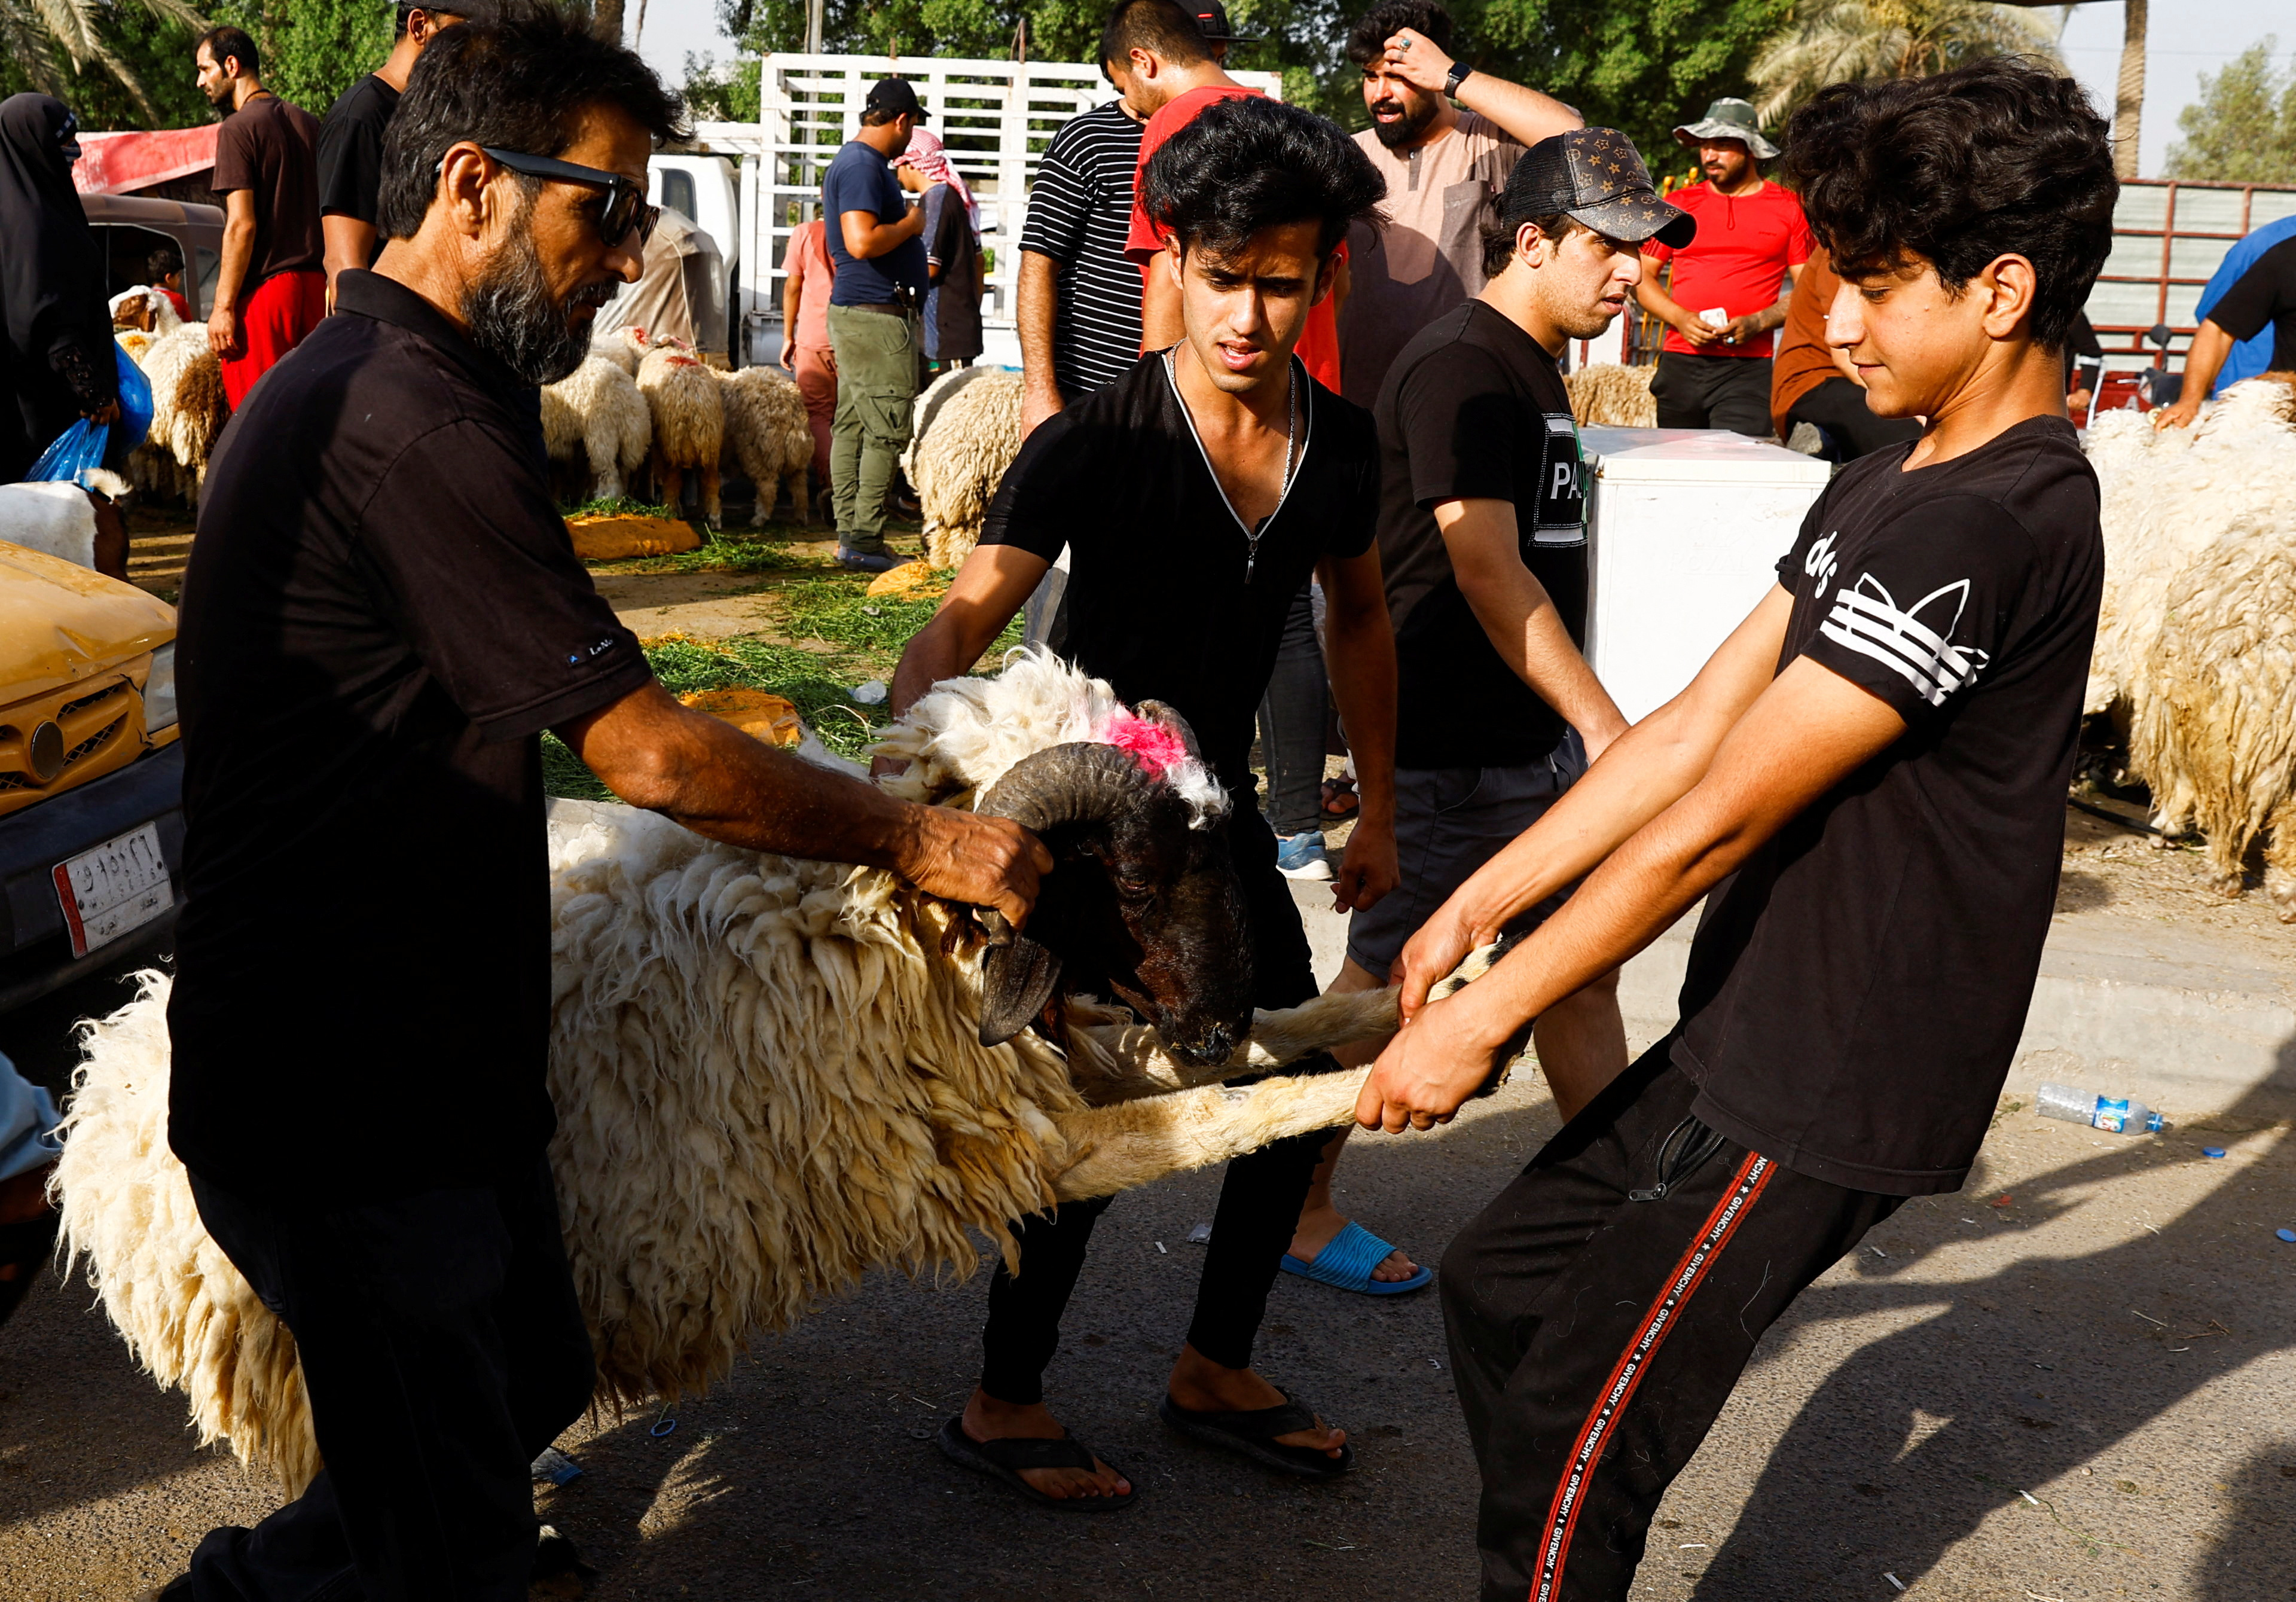 Iraqi men move a sacrificial ram after purchasing it from a livestock market, ahead of the Eid al-Adha festival, in Baghdad